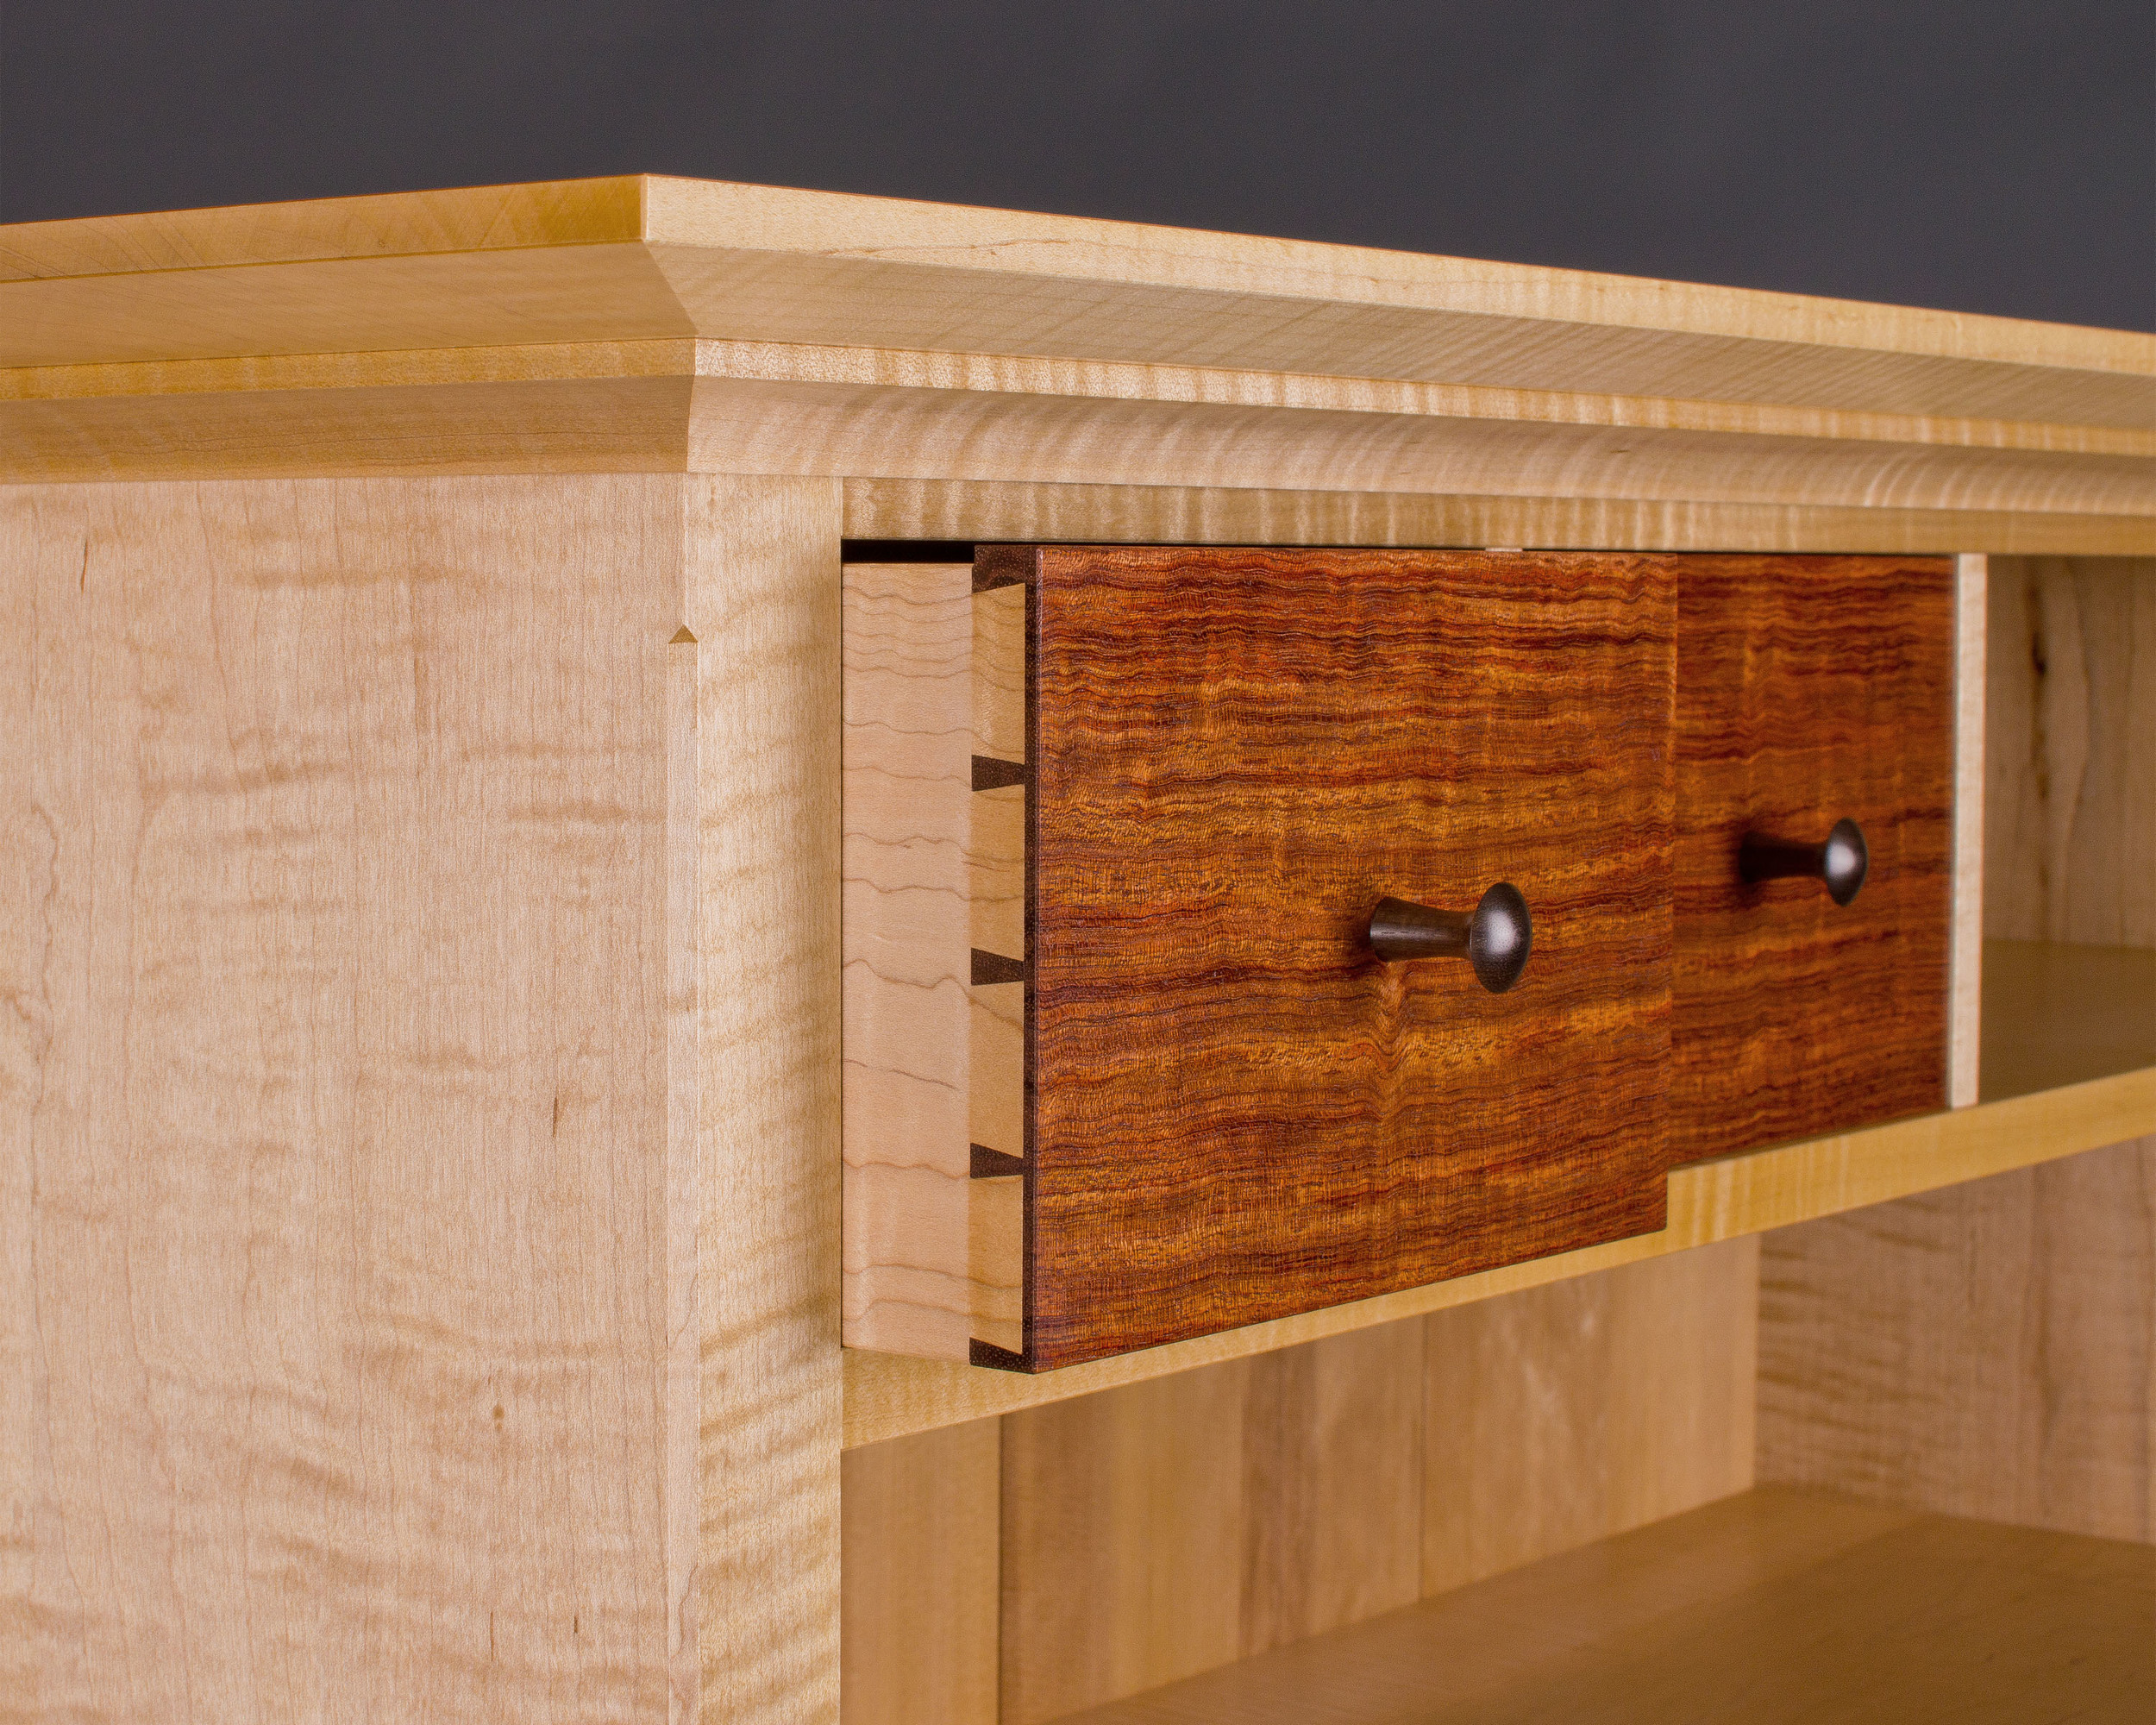 drawers feature hand-cut dovetail joints, the epitome of craftsmanship